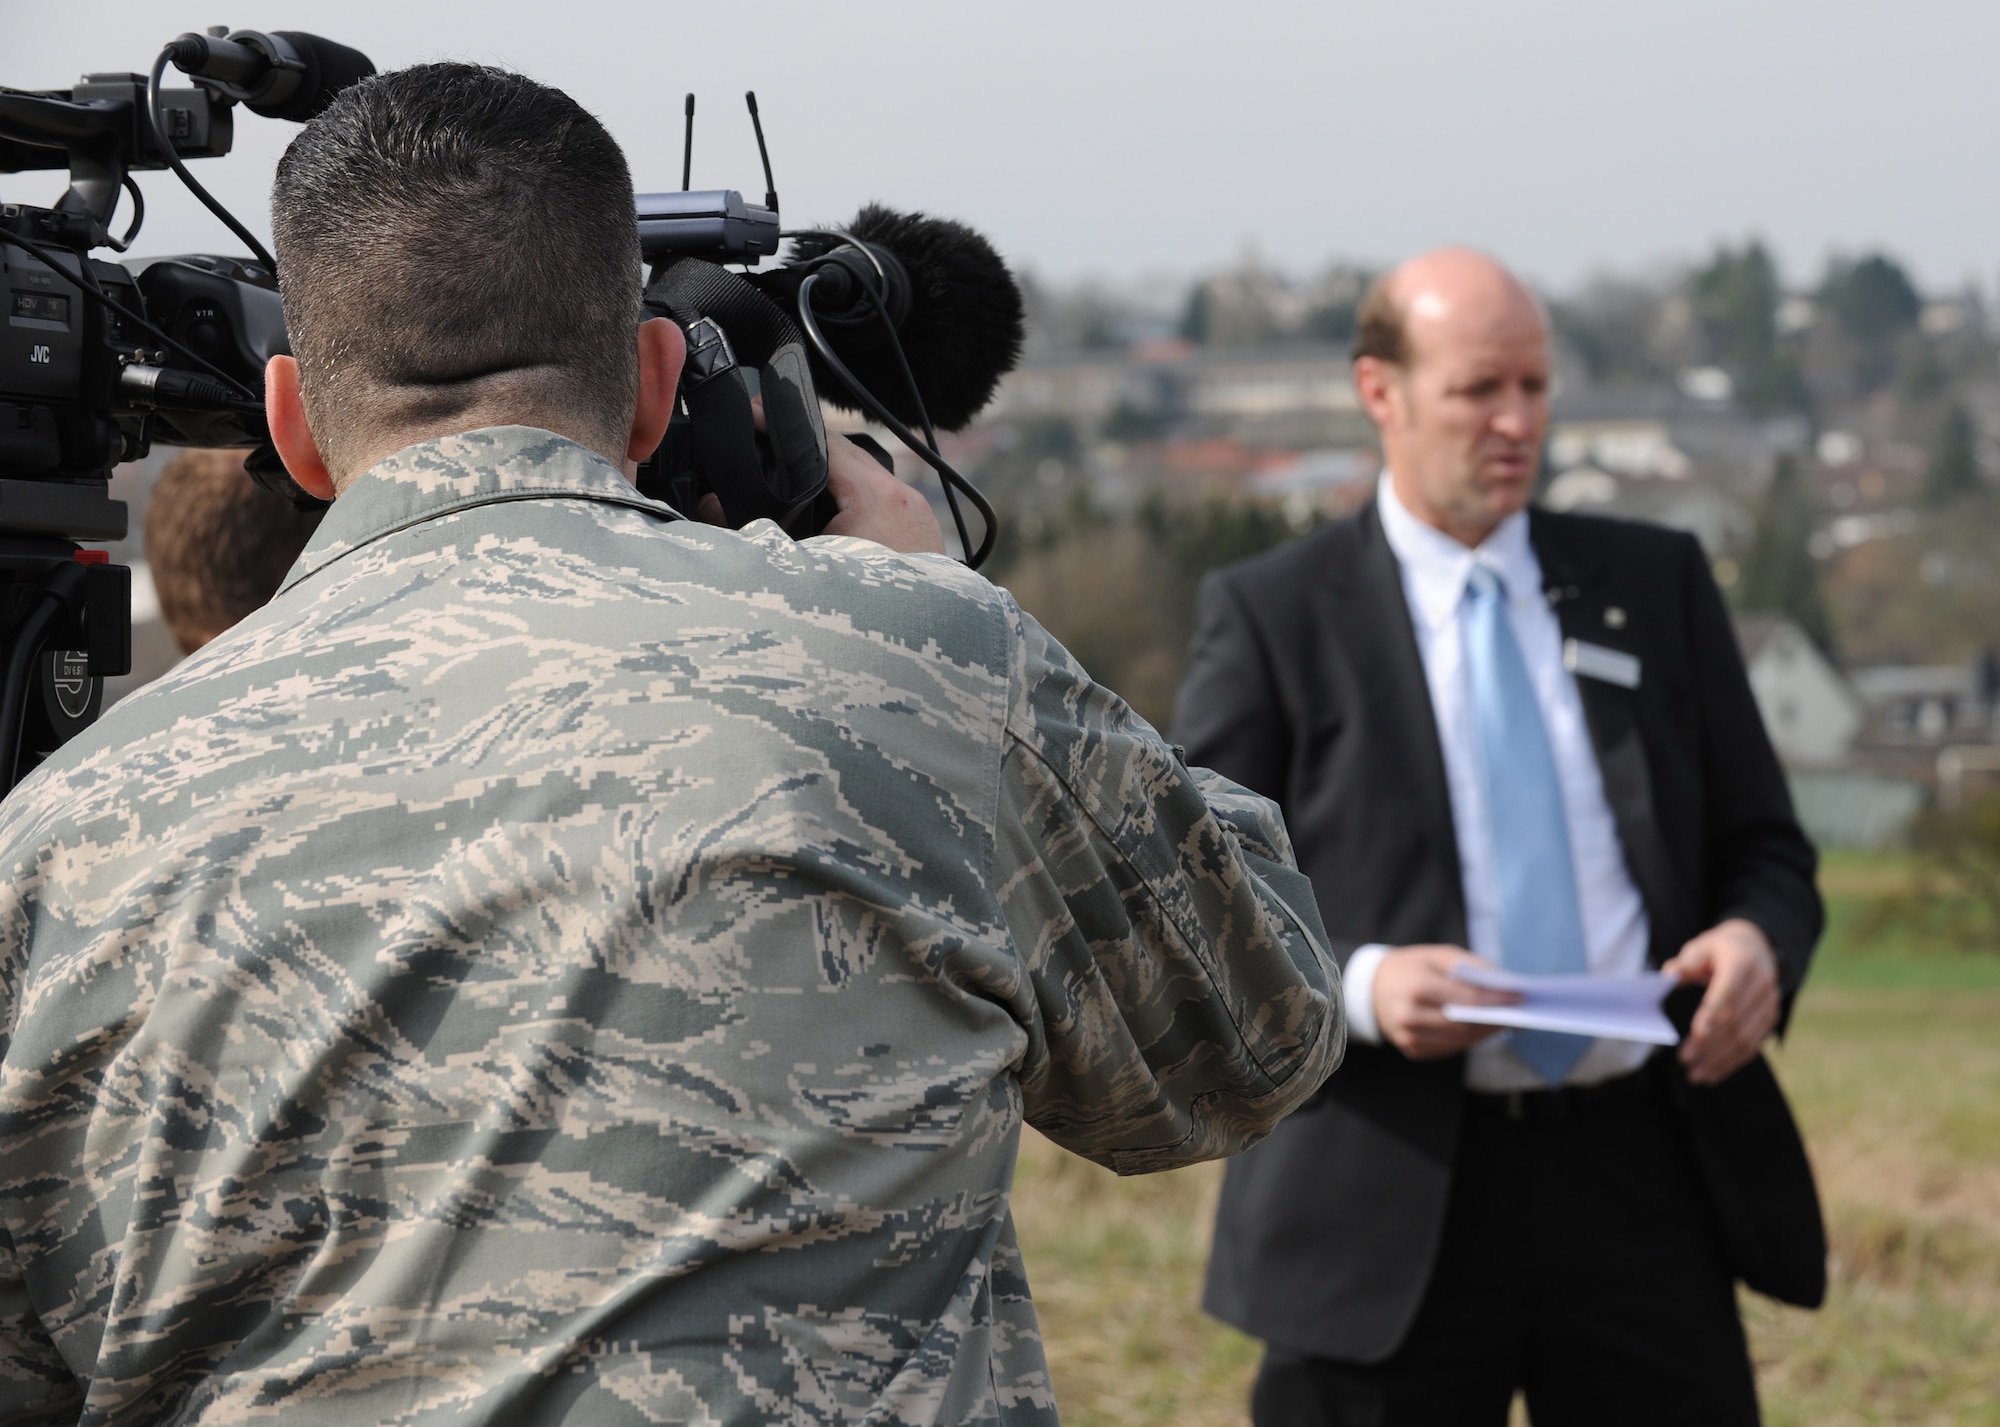 BITBURG, Germany – Staff Sgt. Matthew Bright, 52nd Fighter Wing Public Affairs broadcaster, documents an interview with Rudolph Rinnen, public relations specialist for Volksbank Bitburg, during a press event March 24. Wreckage of a P-47D Thunderbolt was discovered Feb. 24 after being buried for 65 years. German and American reports detail that on Feb. 14, 1945, an American P-47D was shot down in the area. (U.S. Air Force photo/Senior Airman Nathanael Callon)